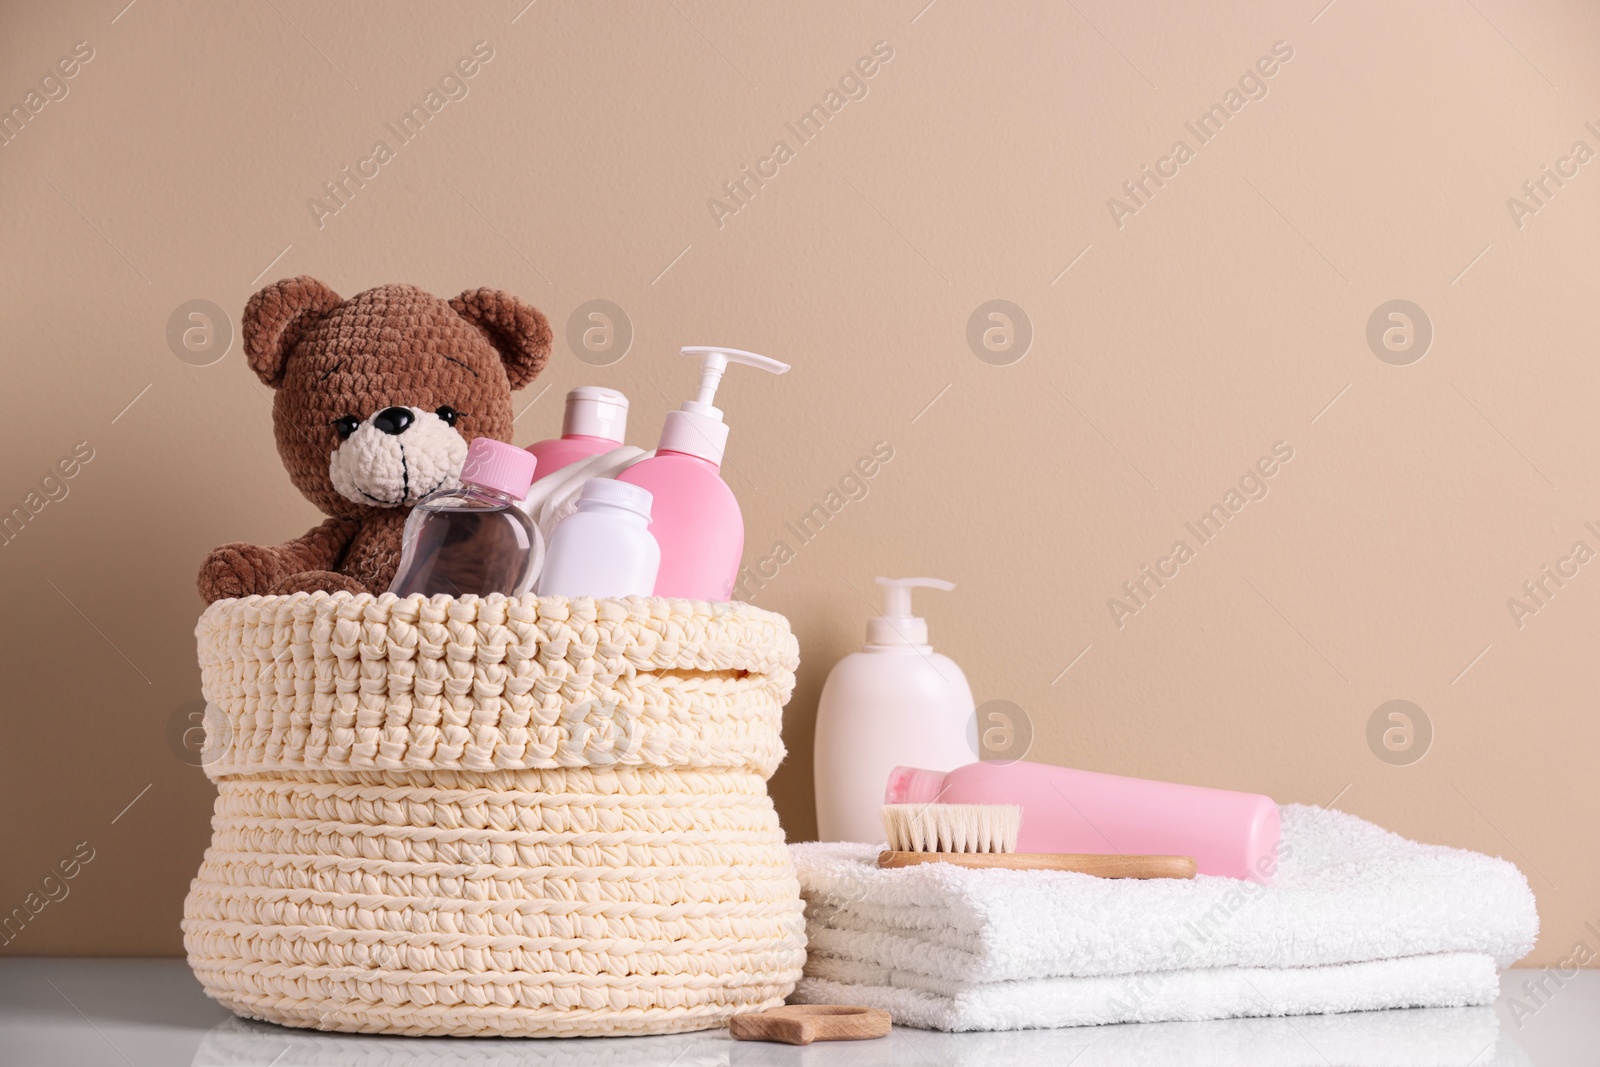 Photo of Knitted basket with baby cosmetic products, bath accessories and toy bear on white table against beige background